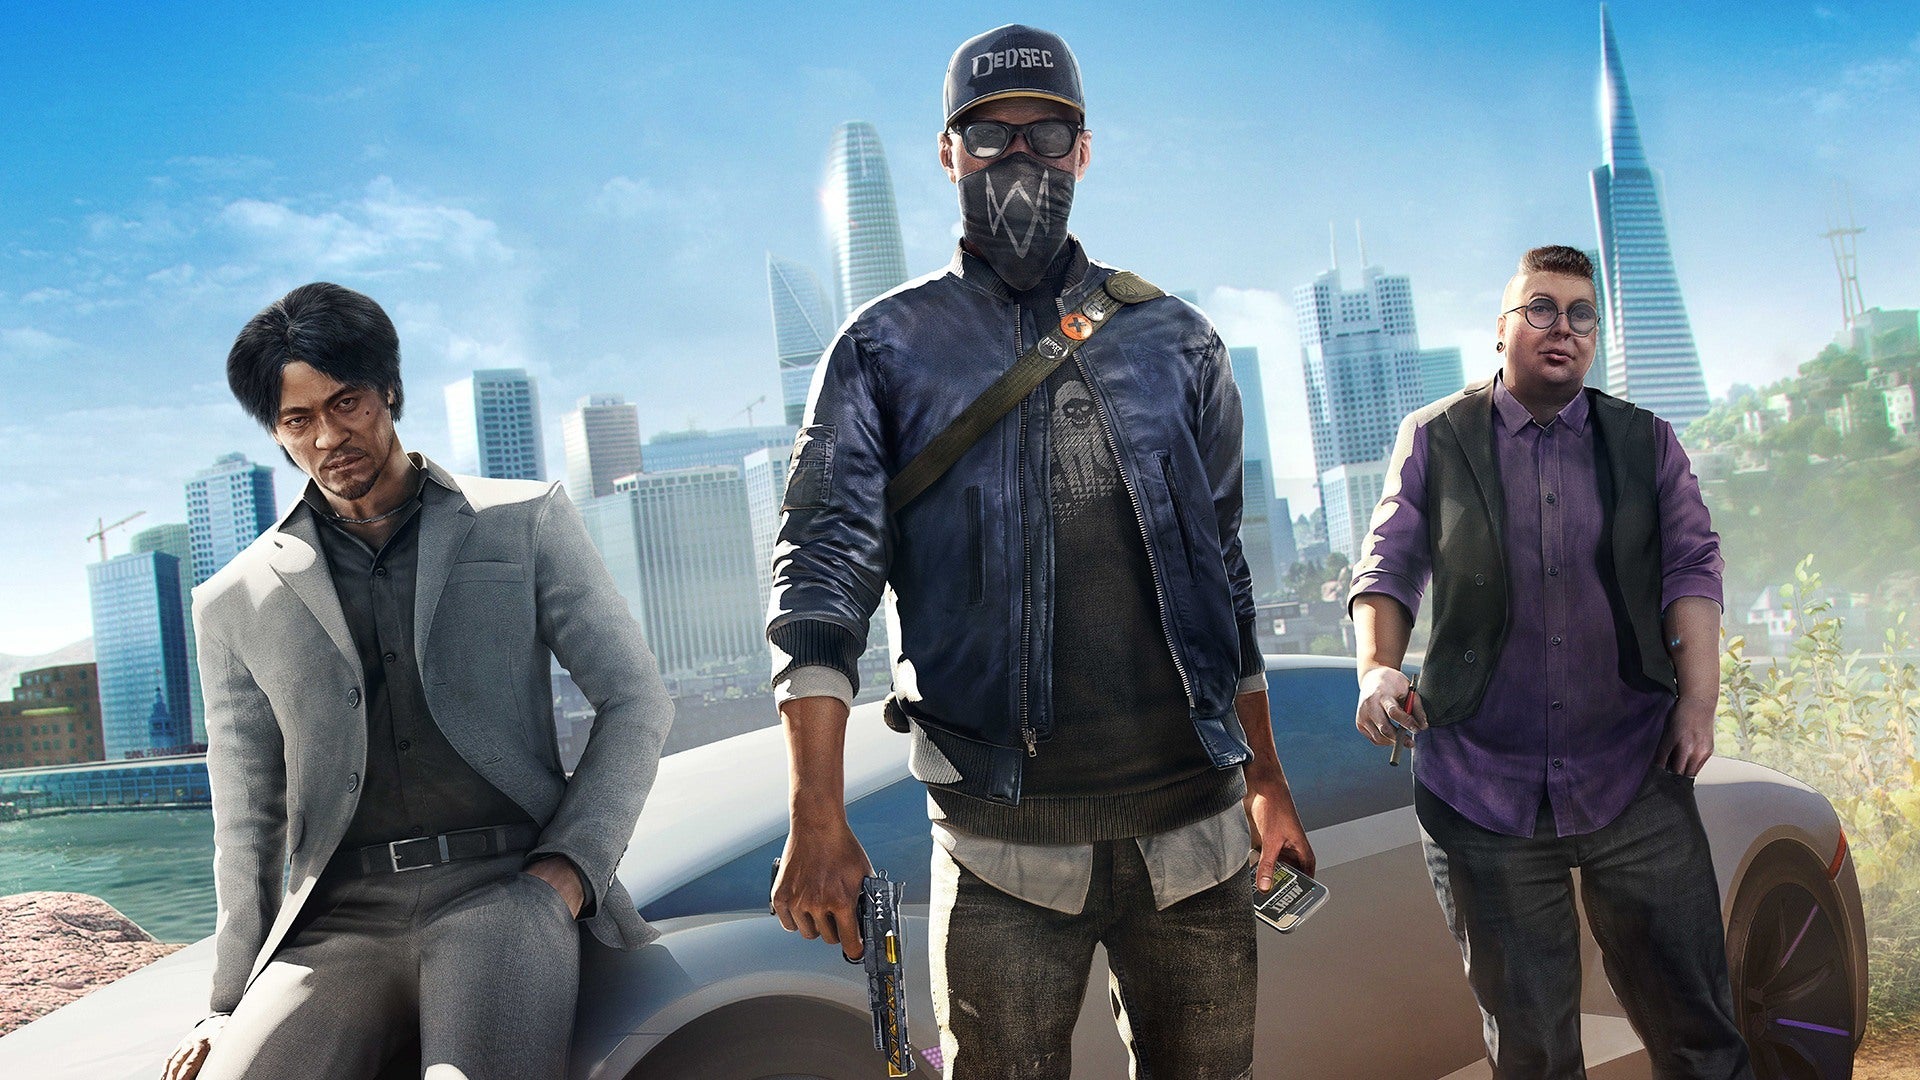 watch dogs 2 dlc download